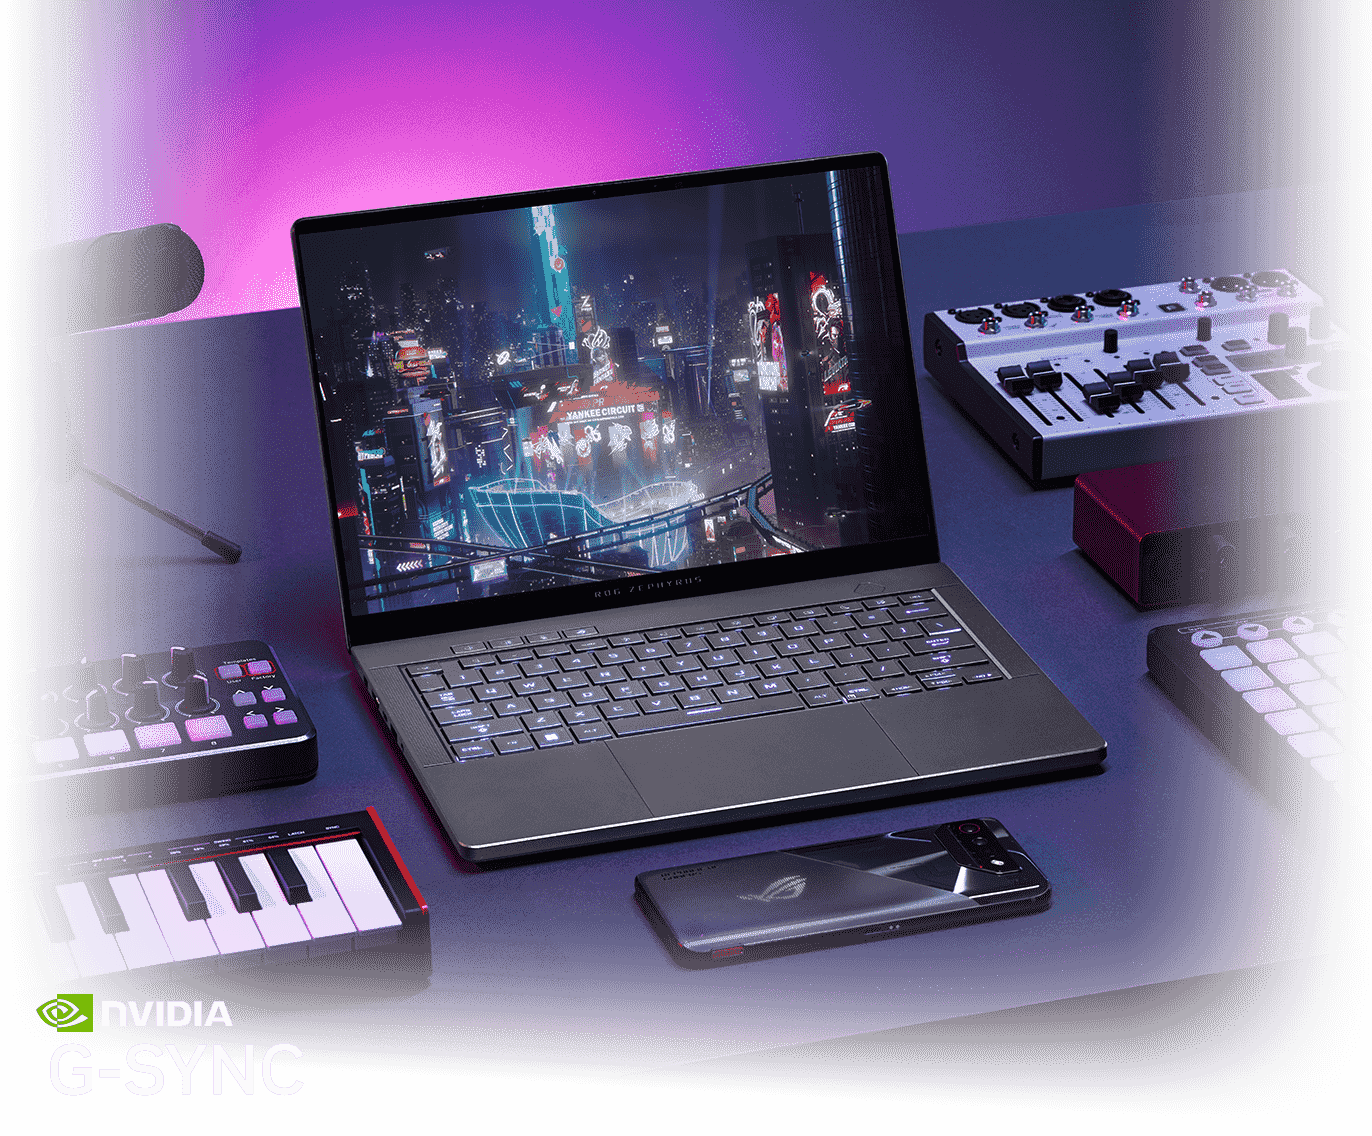 An ROG Zephyrus G14 sits on a table with the lid open and a cyberpunk scene on screen, flanked by digital music production equipment, an ROG Phone, an ROG Carnyx microphone, and an ROG headset.